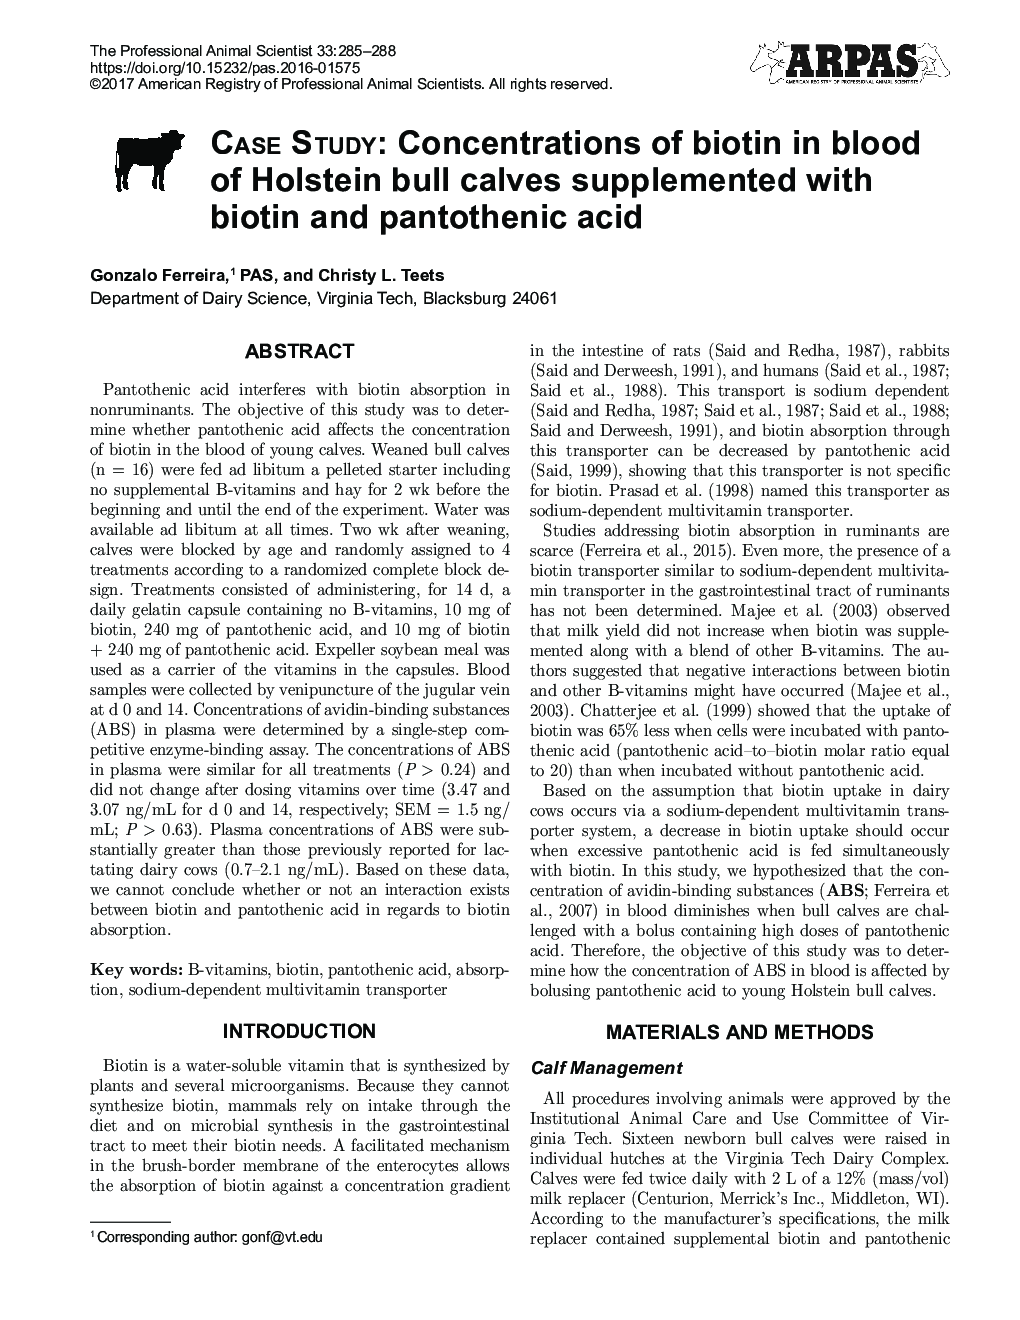 Case Study: Concentrations of biotin in blood of Holstein bull calves supplemented with biotin and pantothenic acid